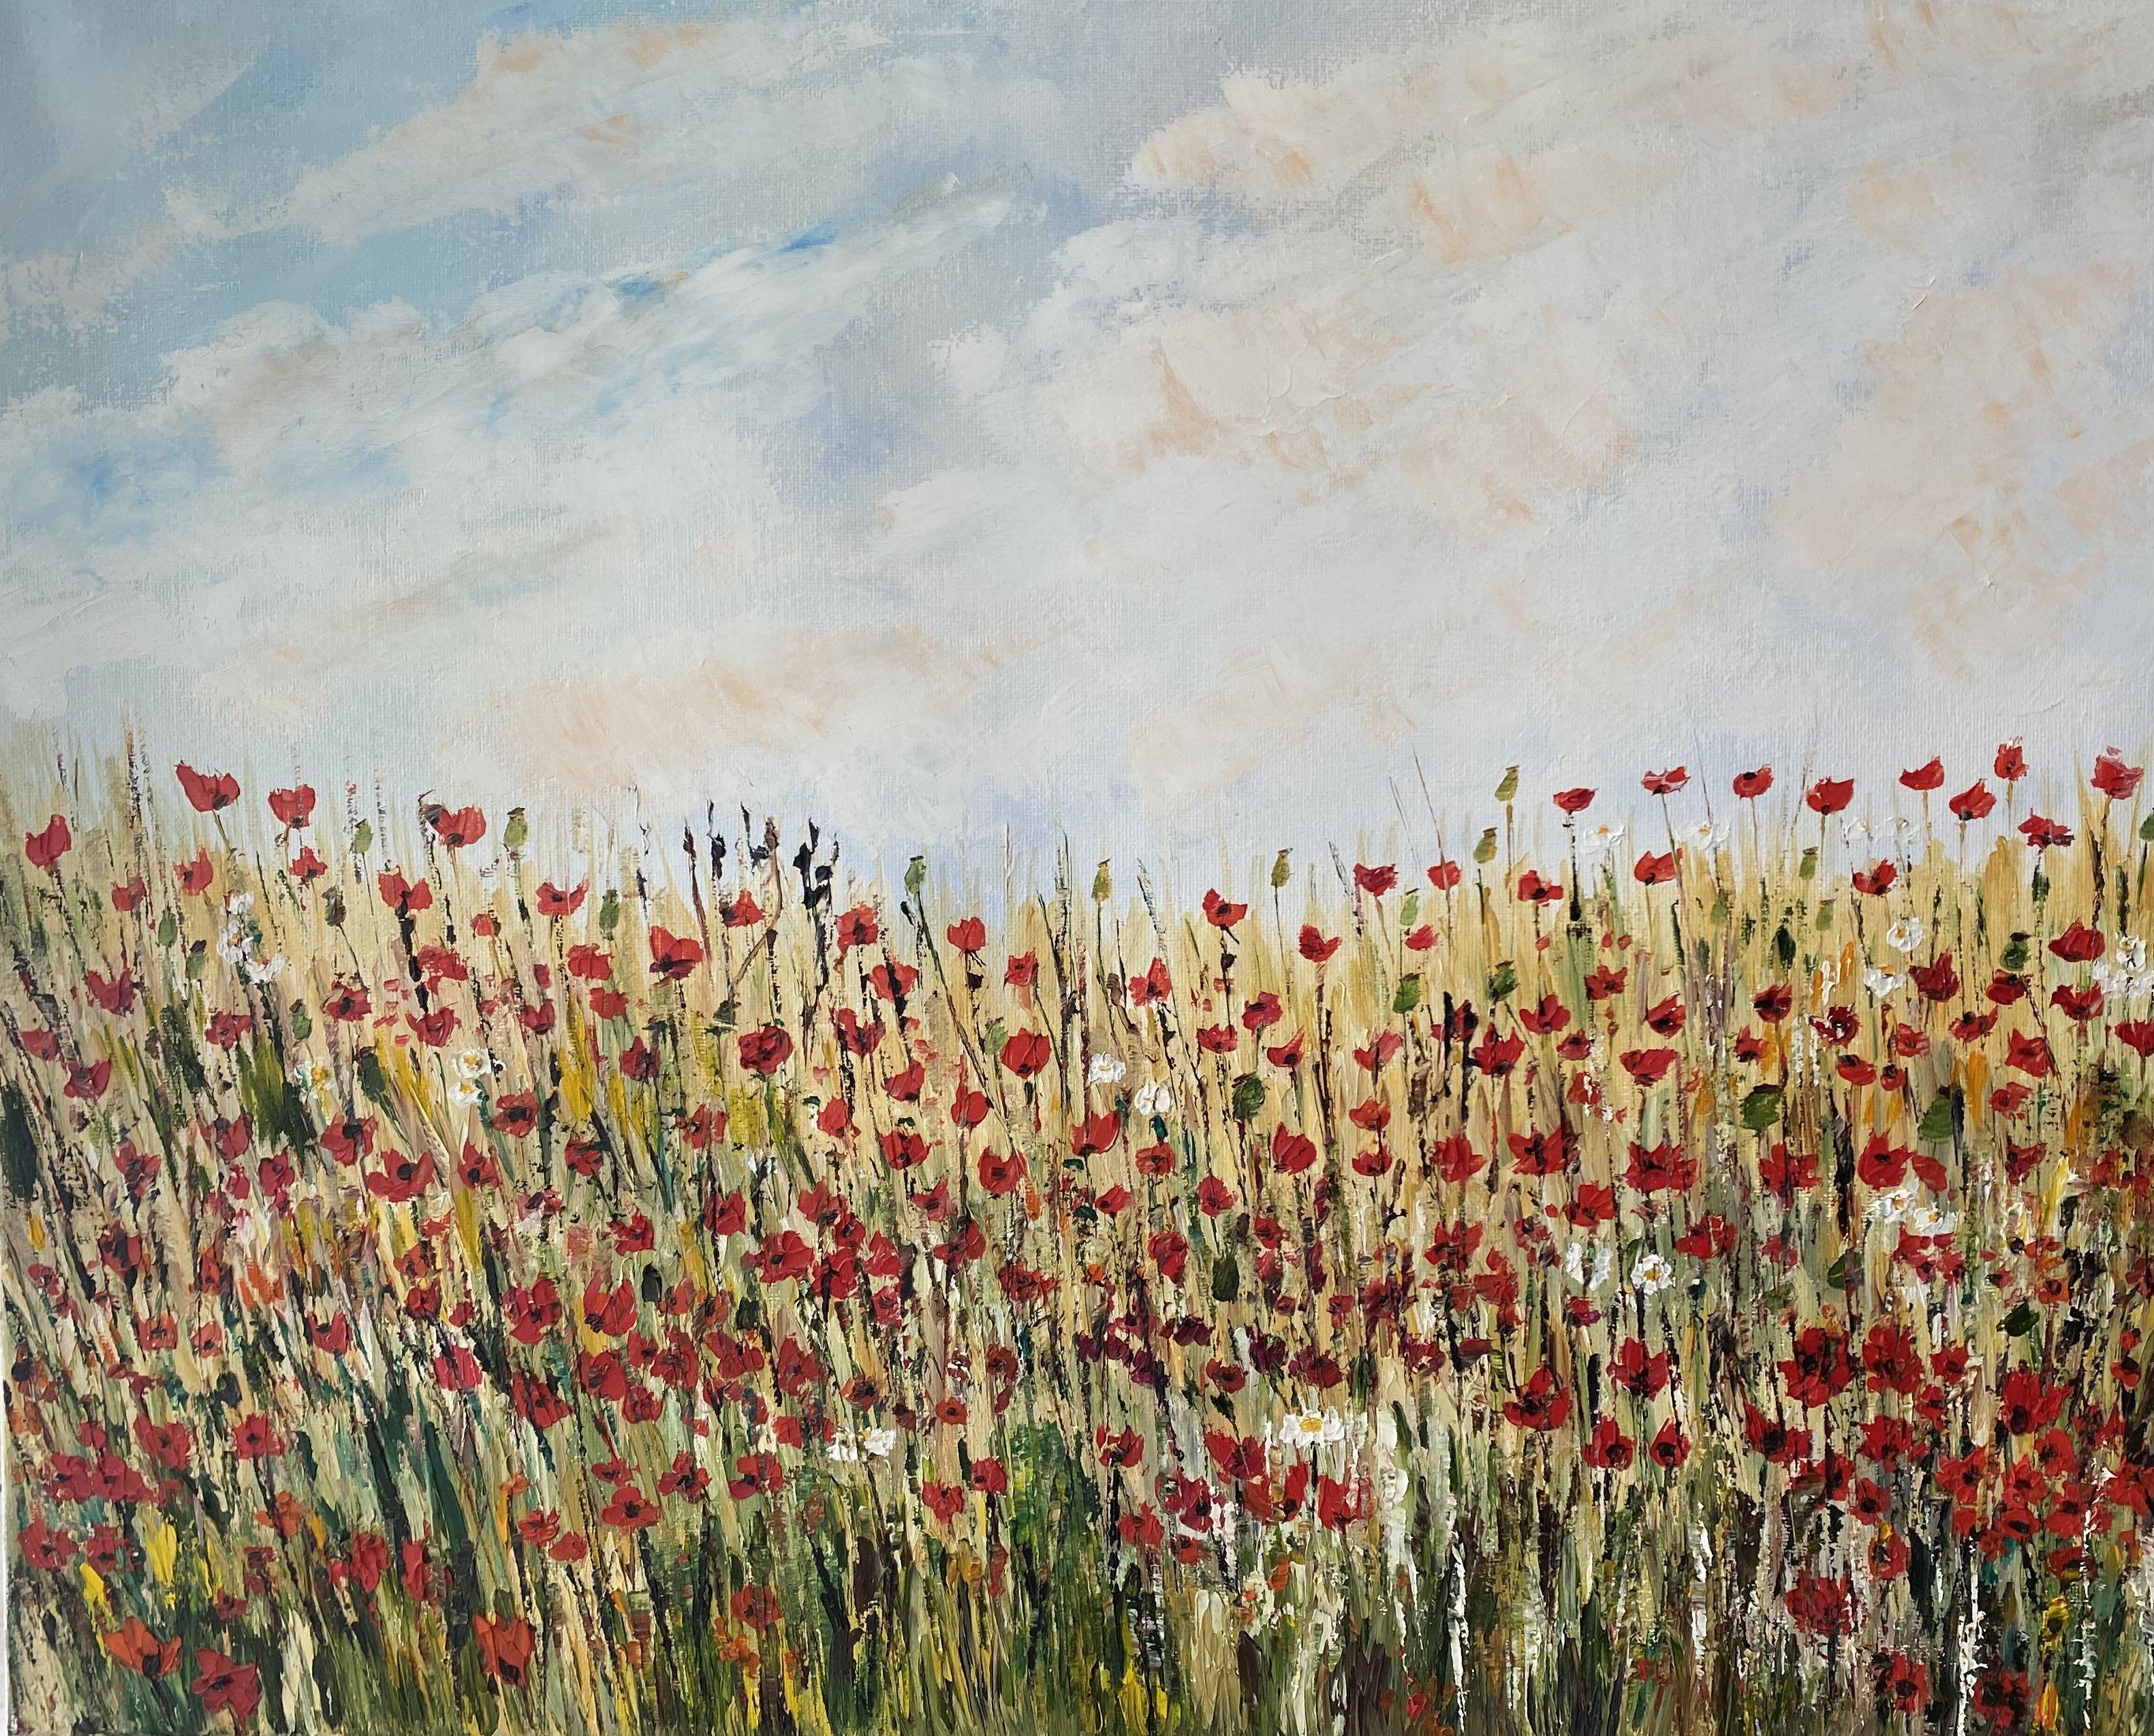 Poppy field under cloudy sky. Beautiful, warm summer day, delicate poppies moving with the wind and the smell of summer - my childhood memory that inspired this painting.  A textured painting with multiple layers using palette knife. :: Painting ::